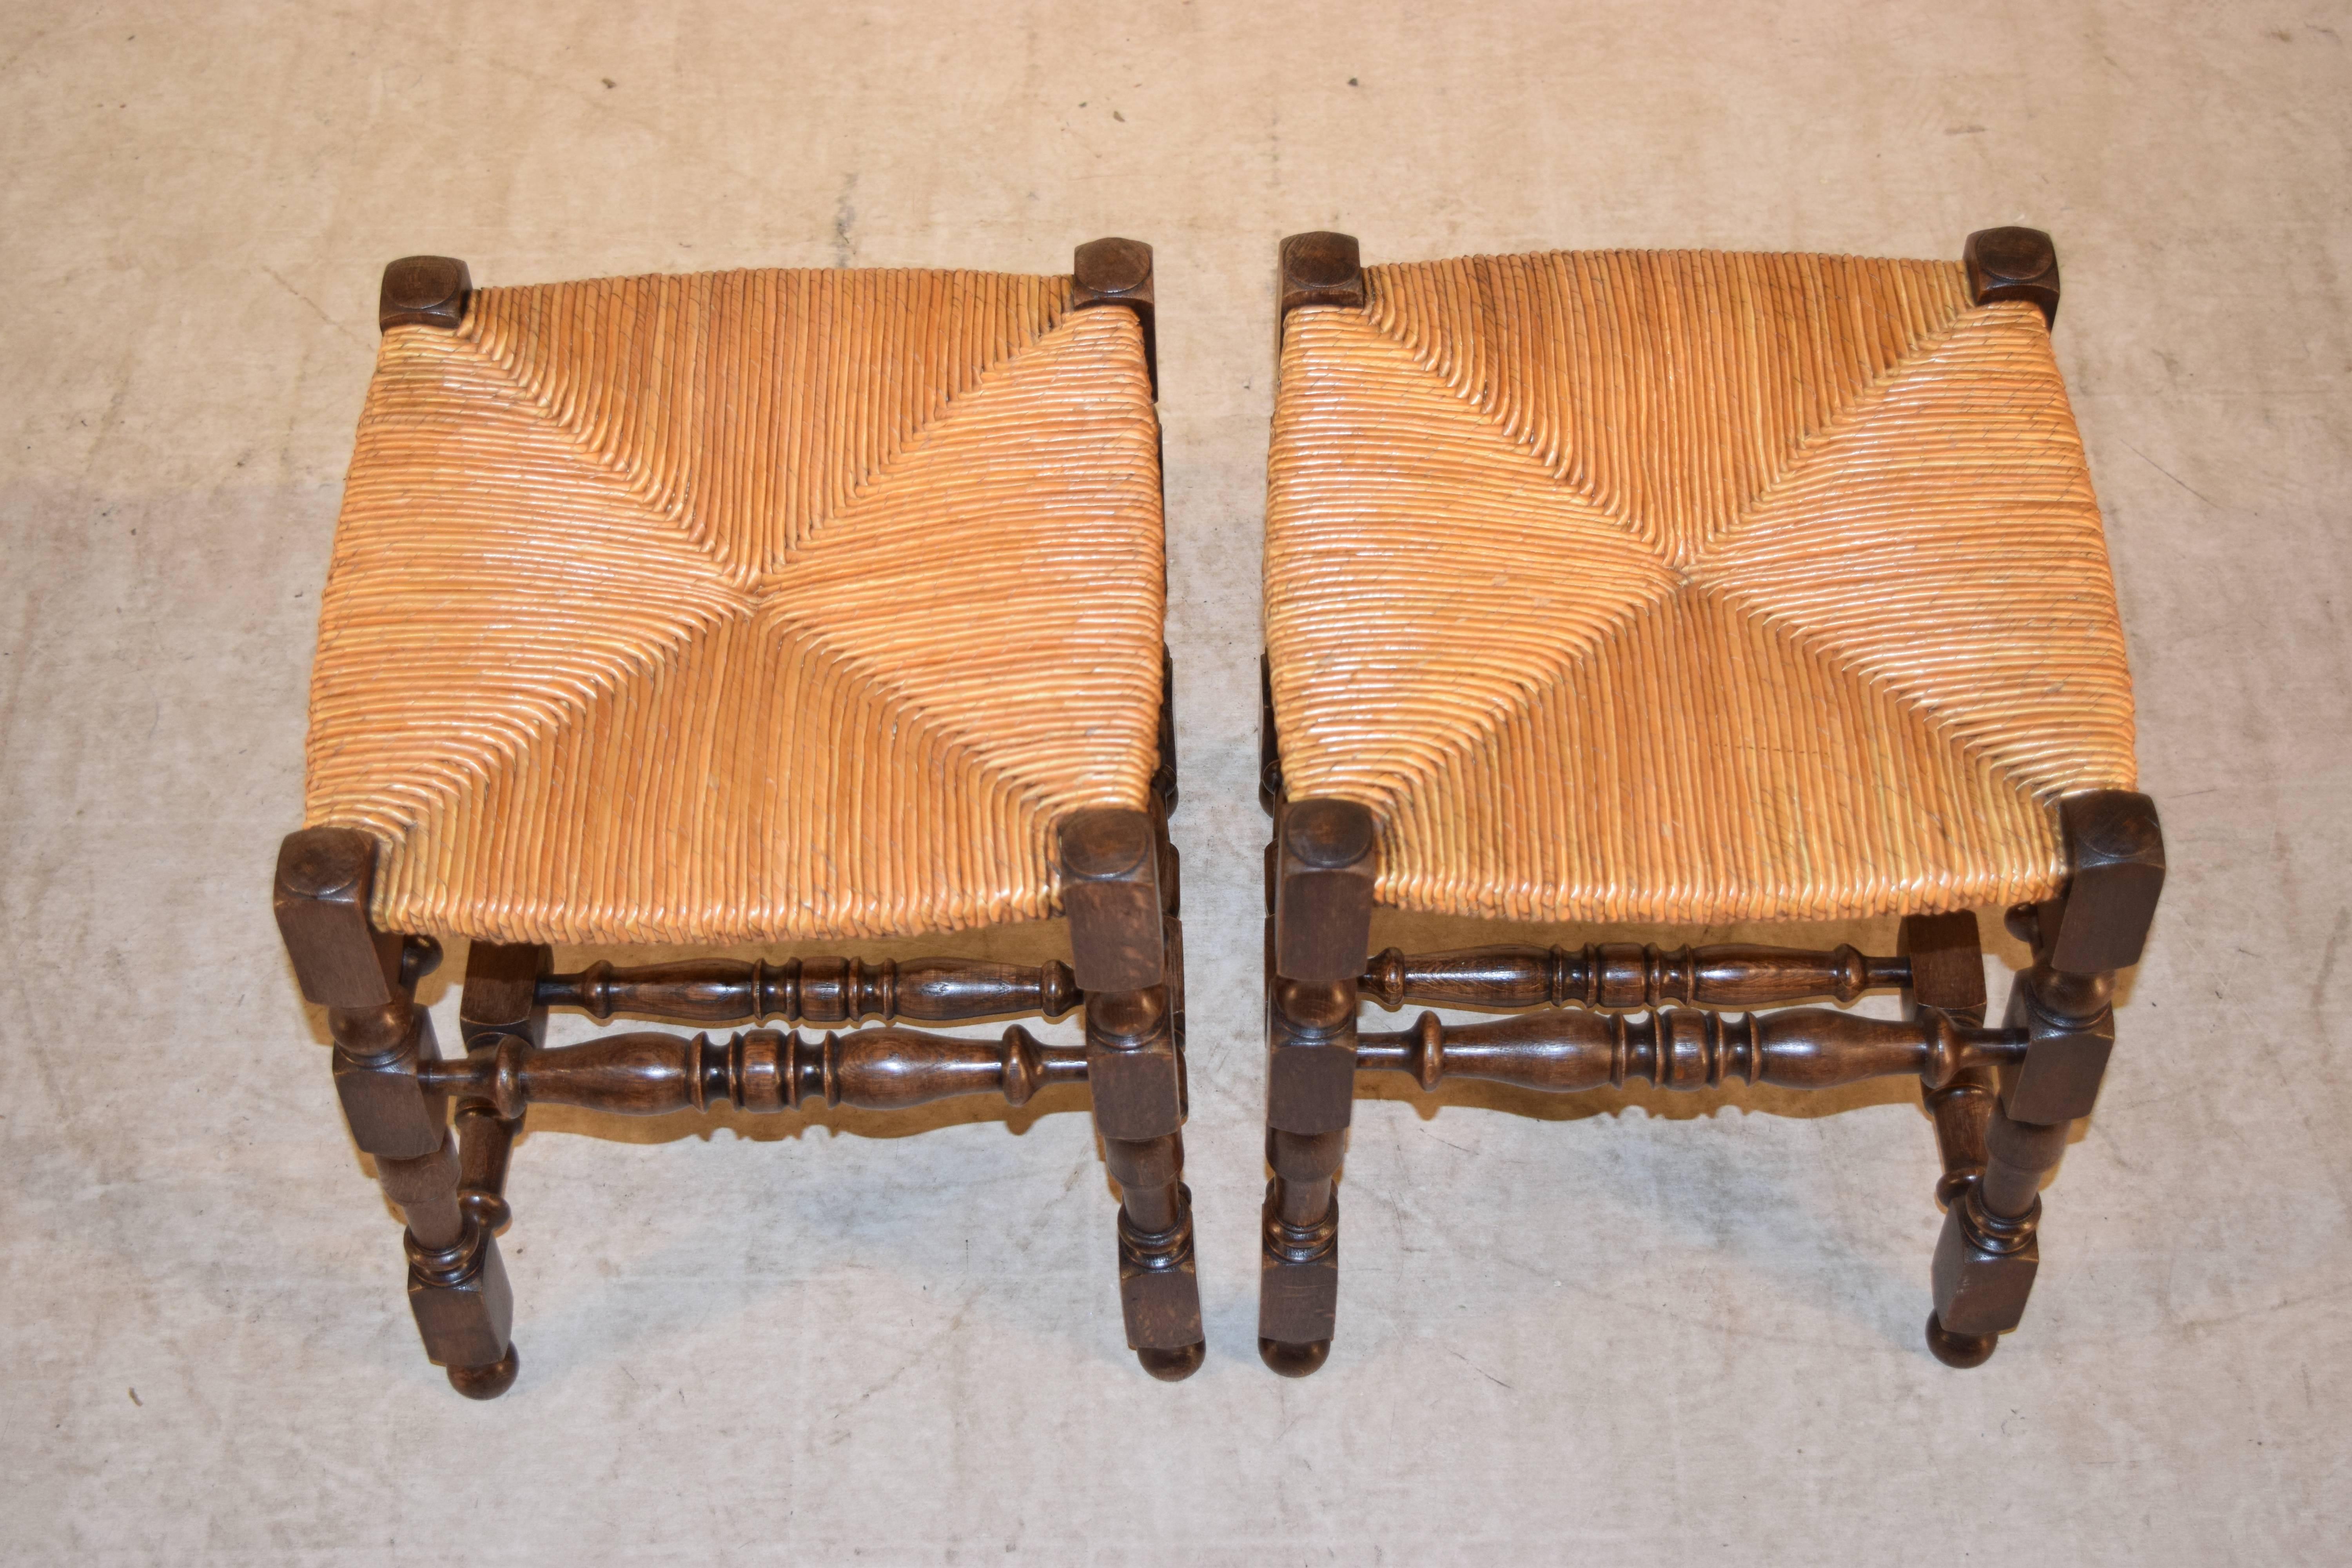 Turned Pair of Late 19th Century French Stools